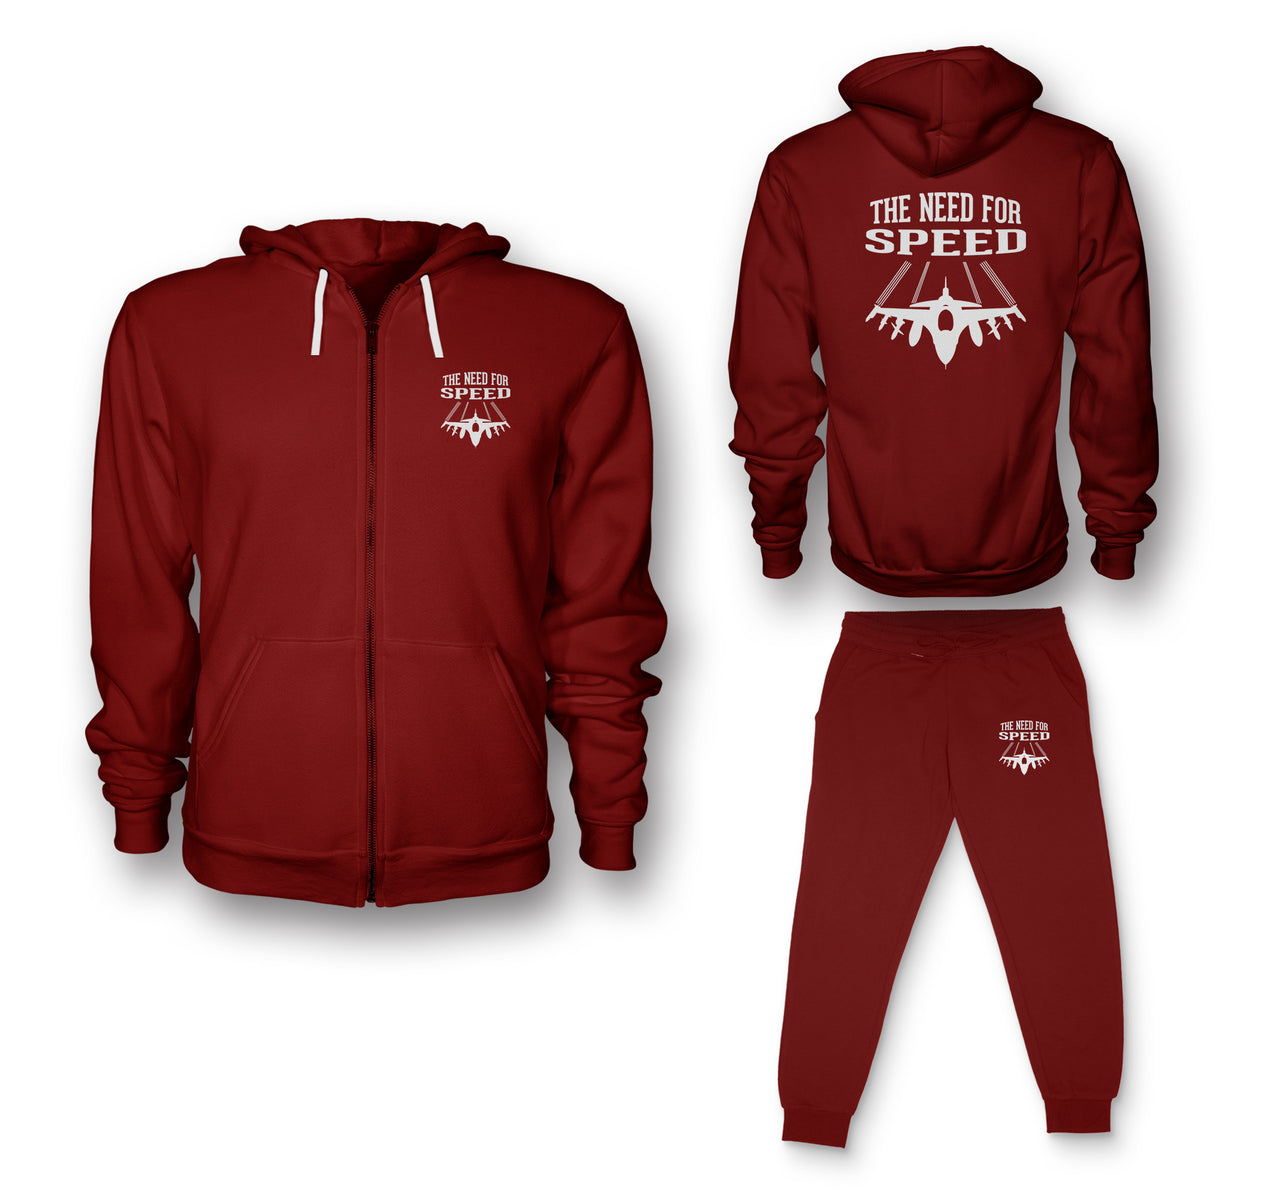 The Need For Speed Designed Zipped Hoodies & Sweatpants Set